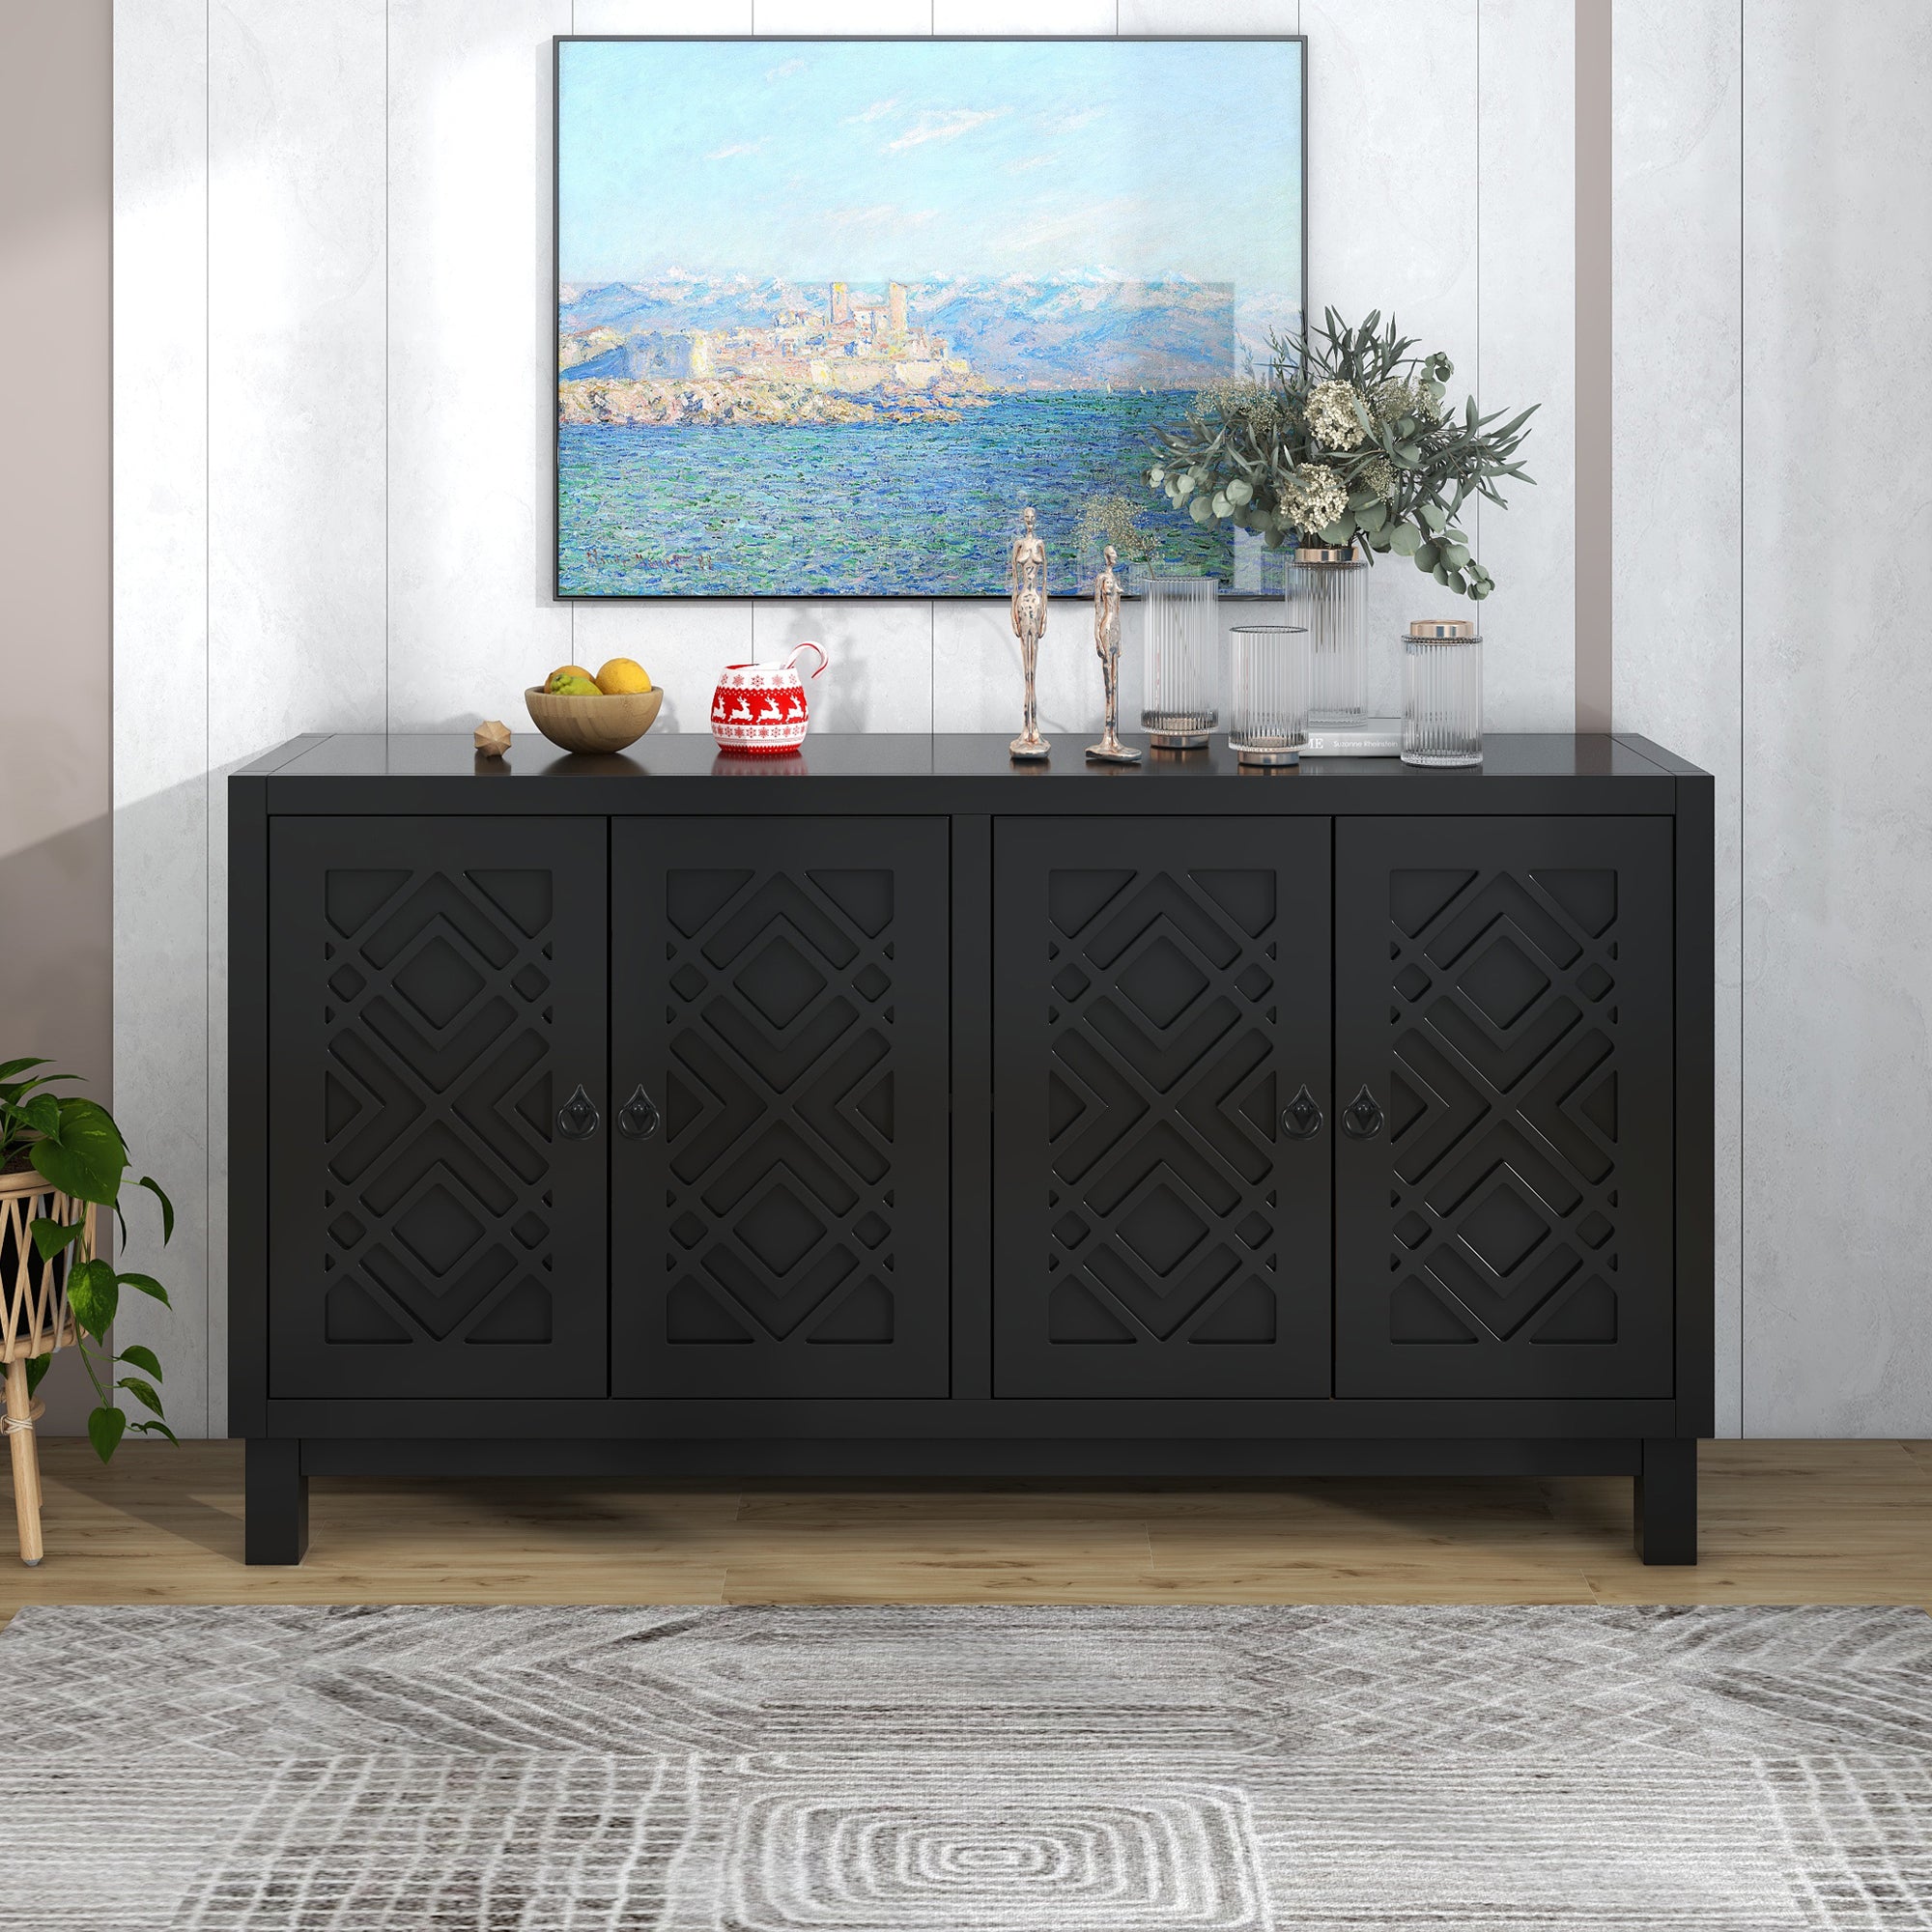 🆓🚛 Large Storage Space Sideboard, 4 Door Buffet Cabinet With Pull Ring Handles for Living Room, Dining Room, Black